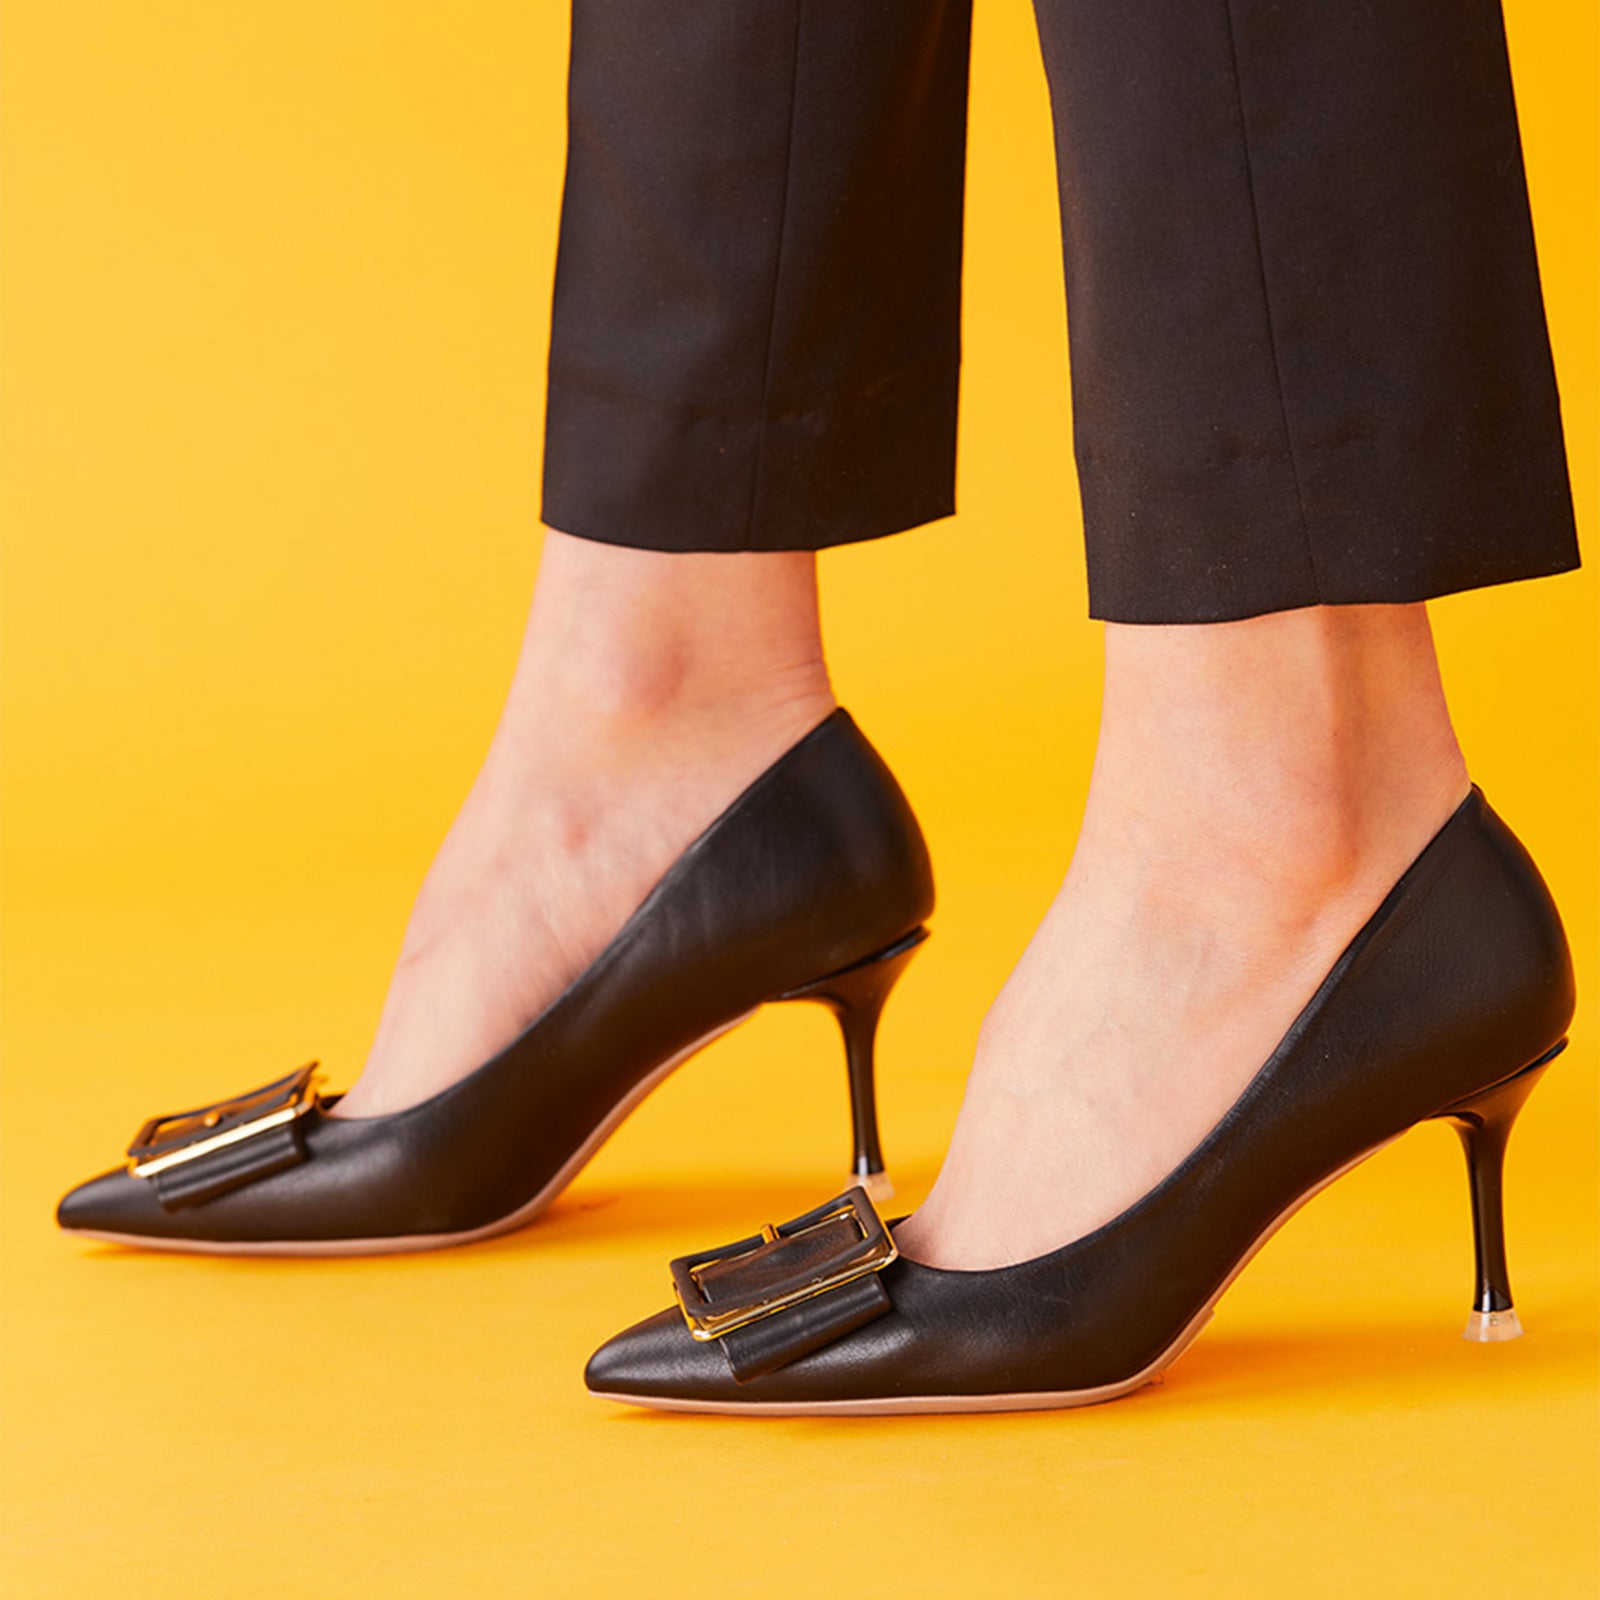 Edgy Minimalism: Black Square Buckled Pumps, a chic and minimalist choice for a contemporary and sleek ensemble